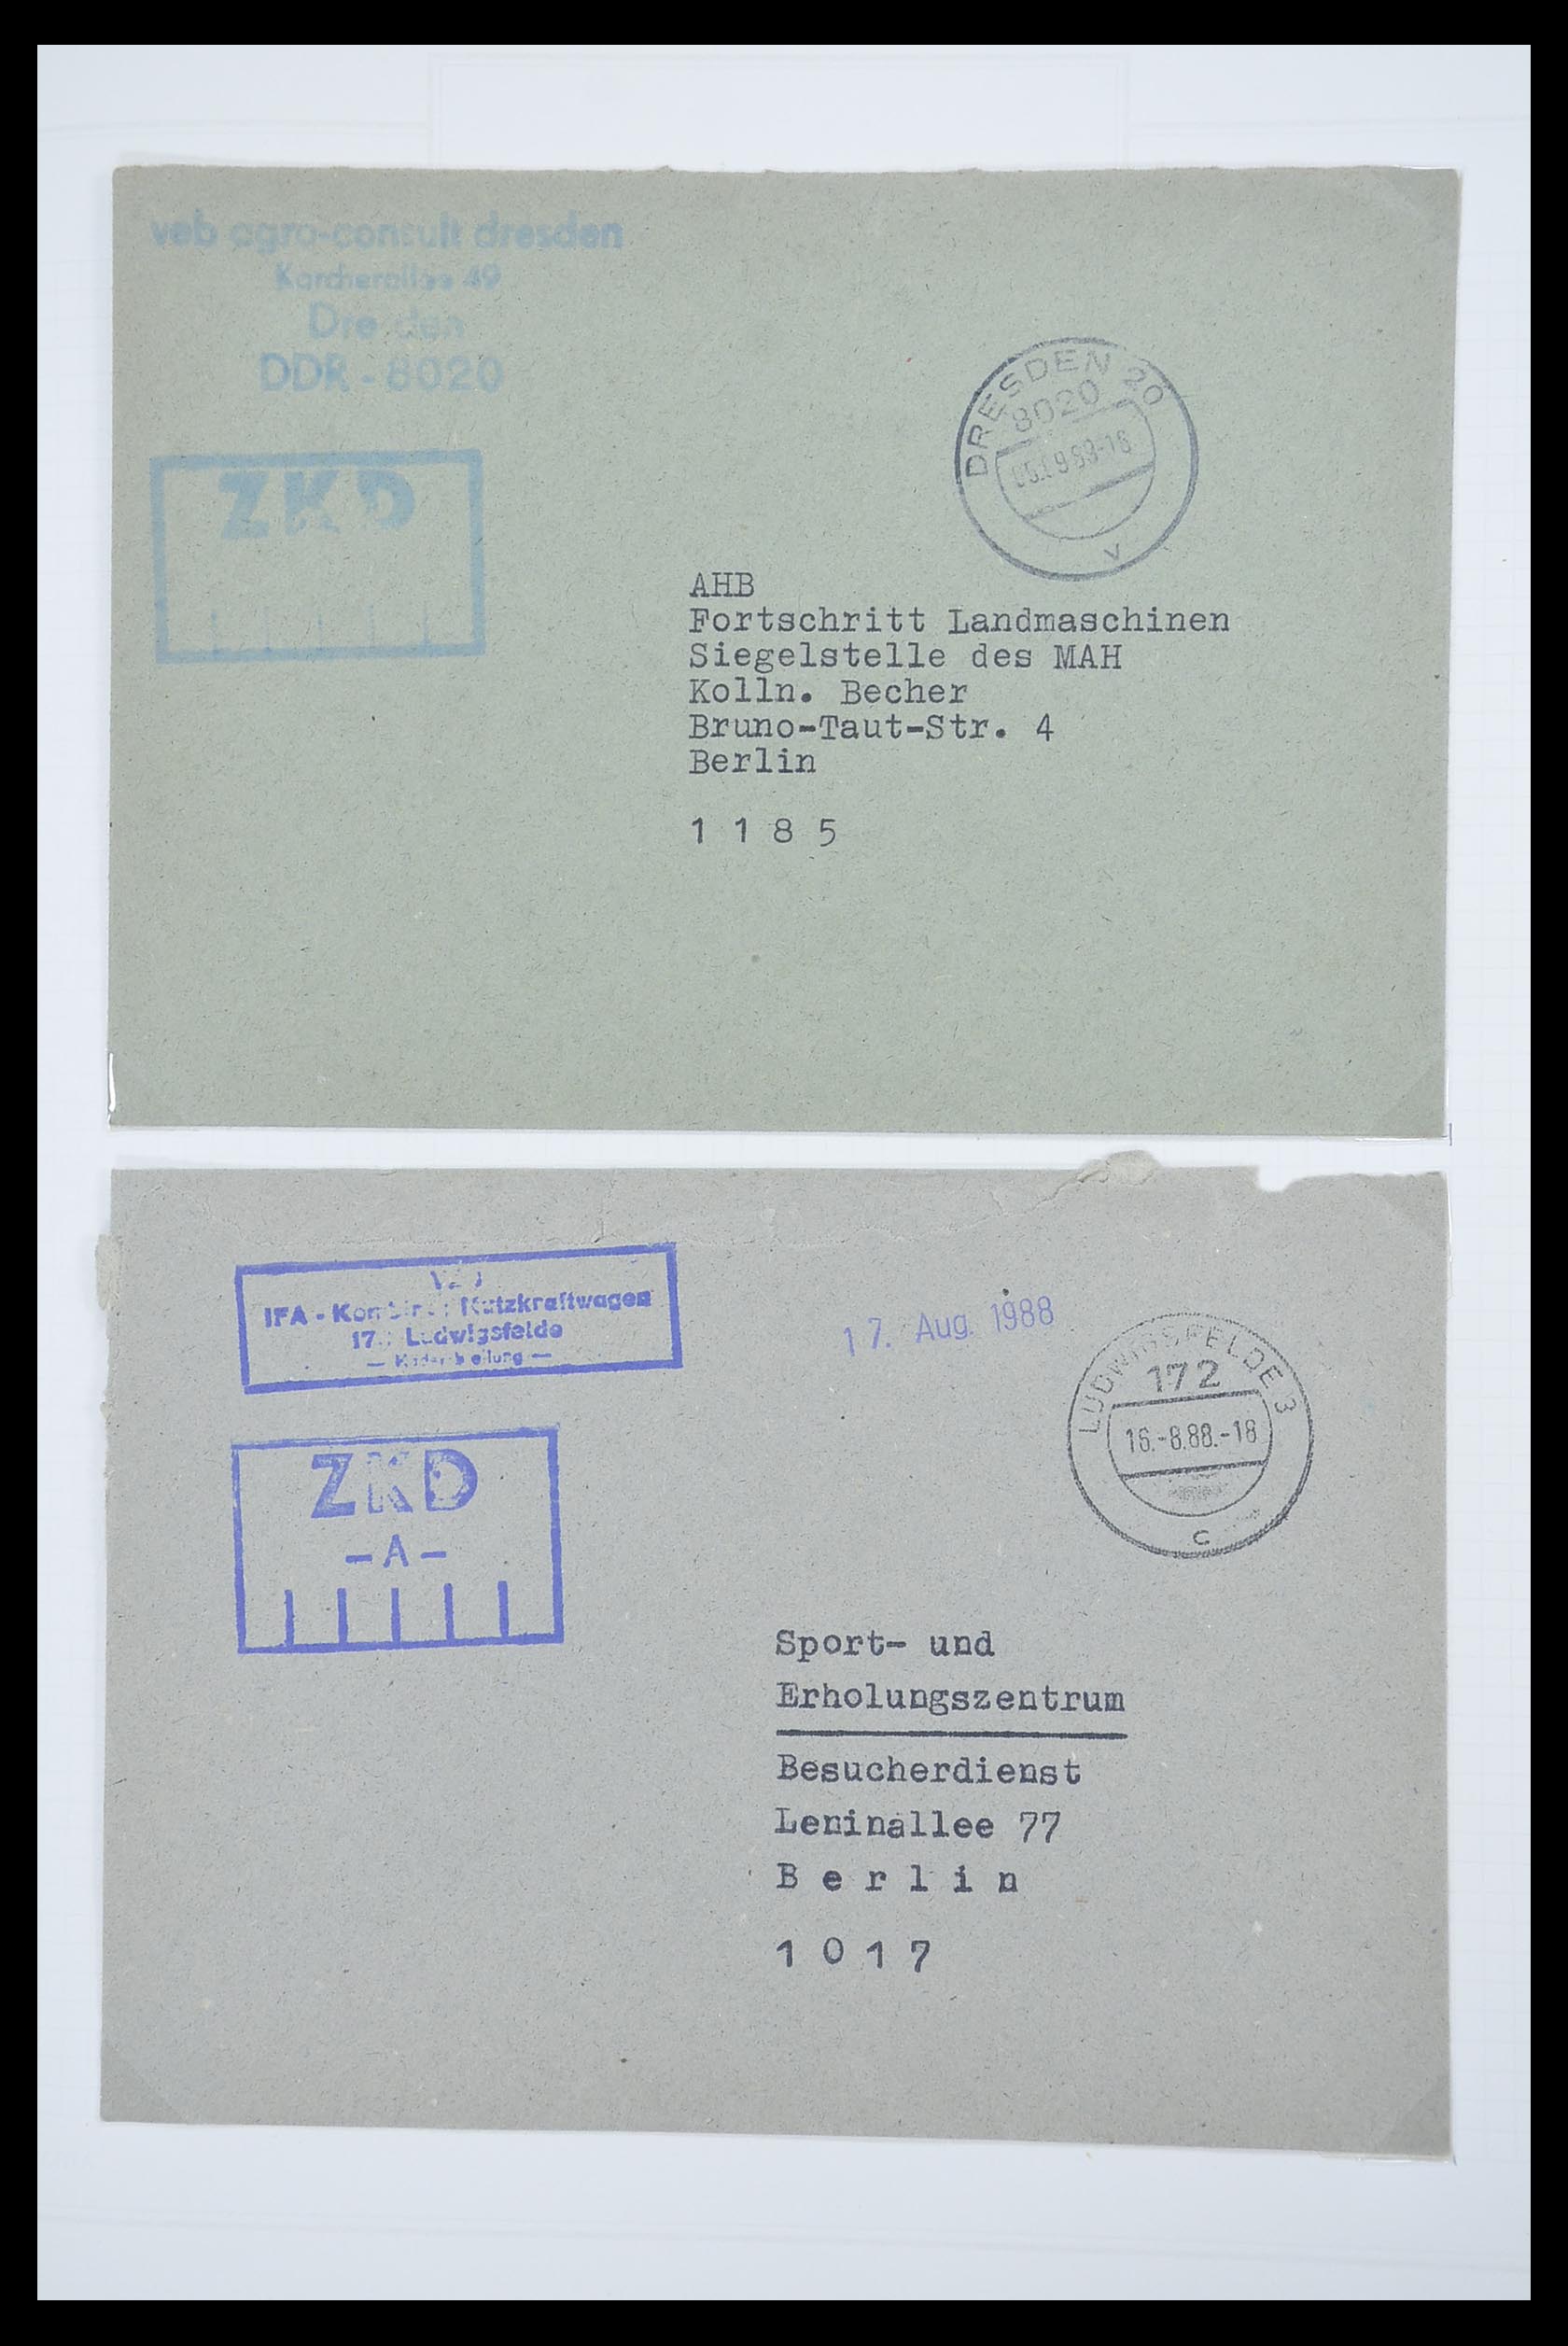 33883 027 - Stamp collection 33883 DDR service covers 1956-1986.